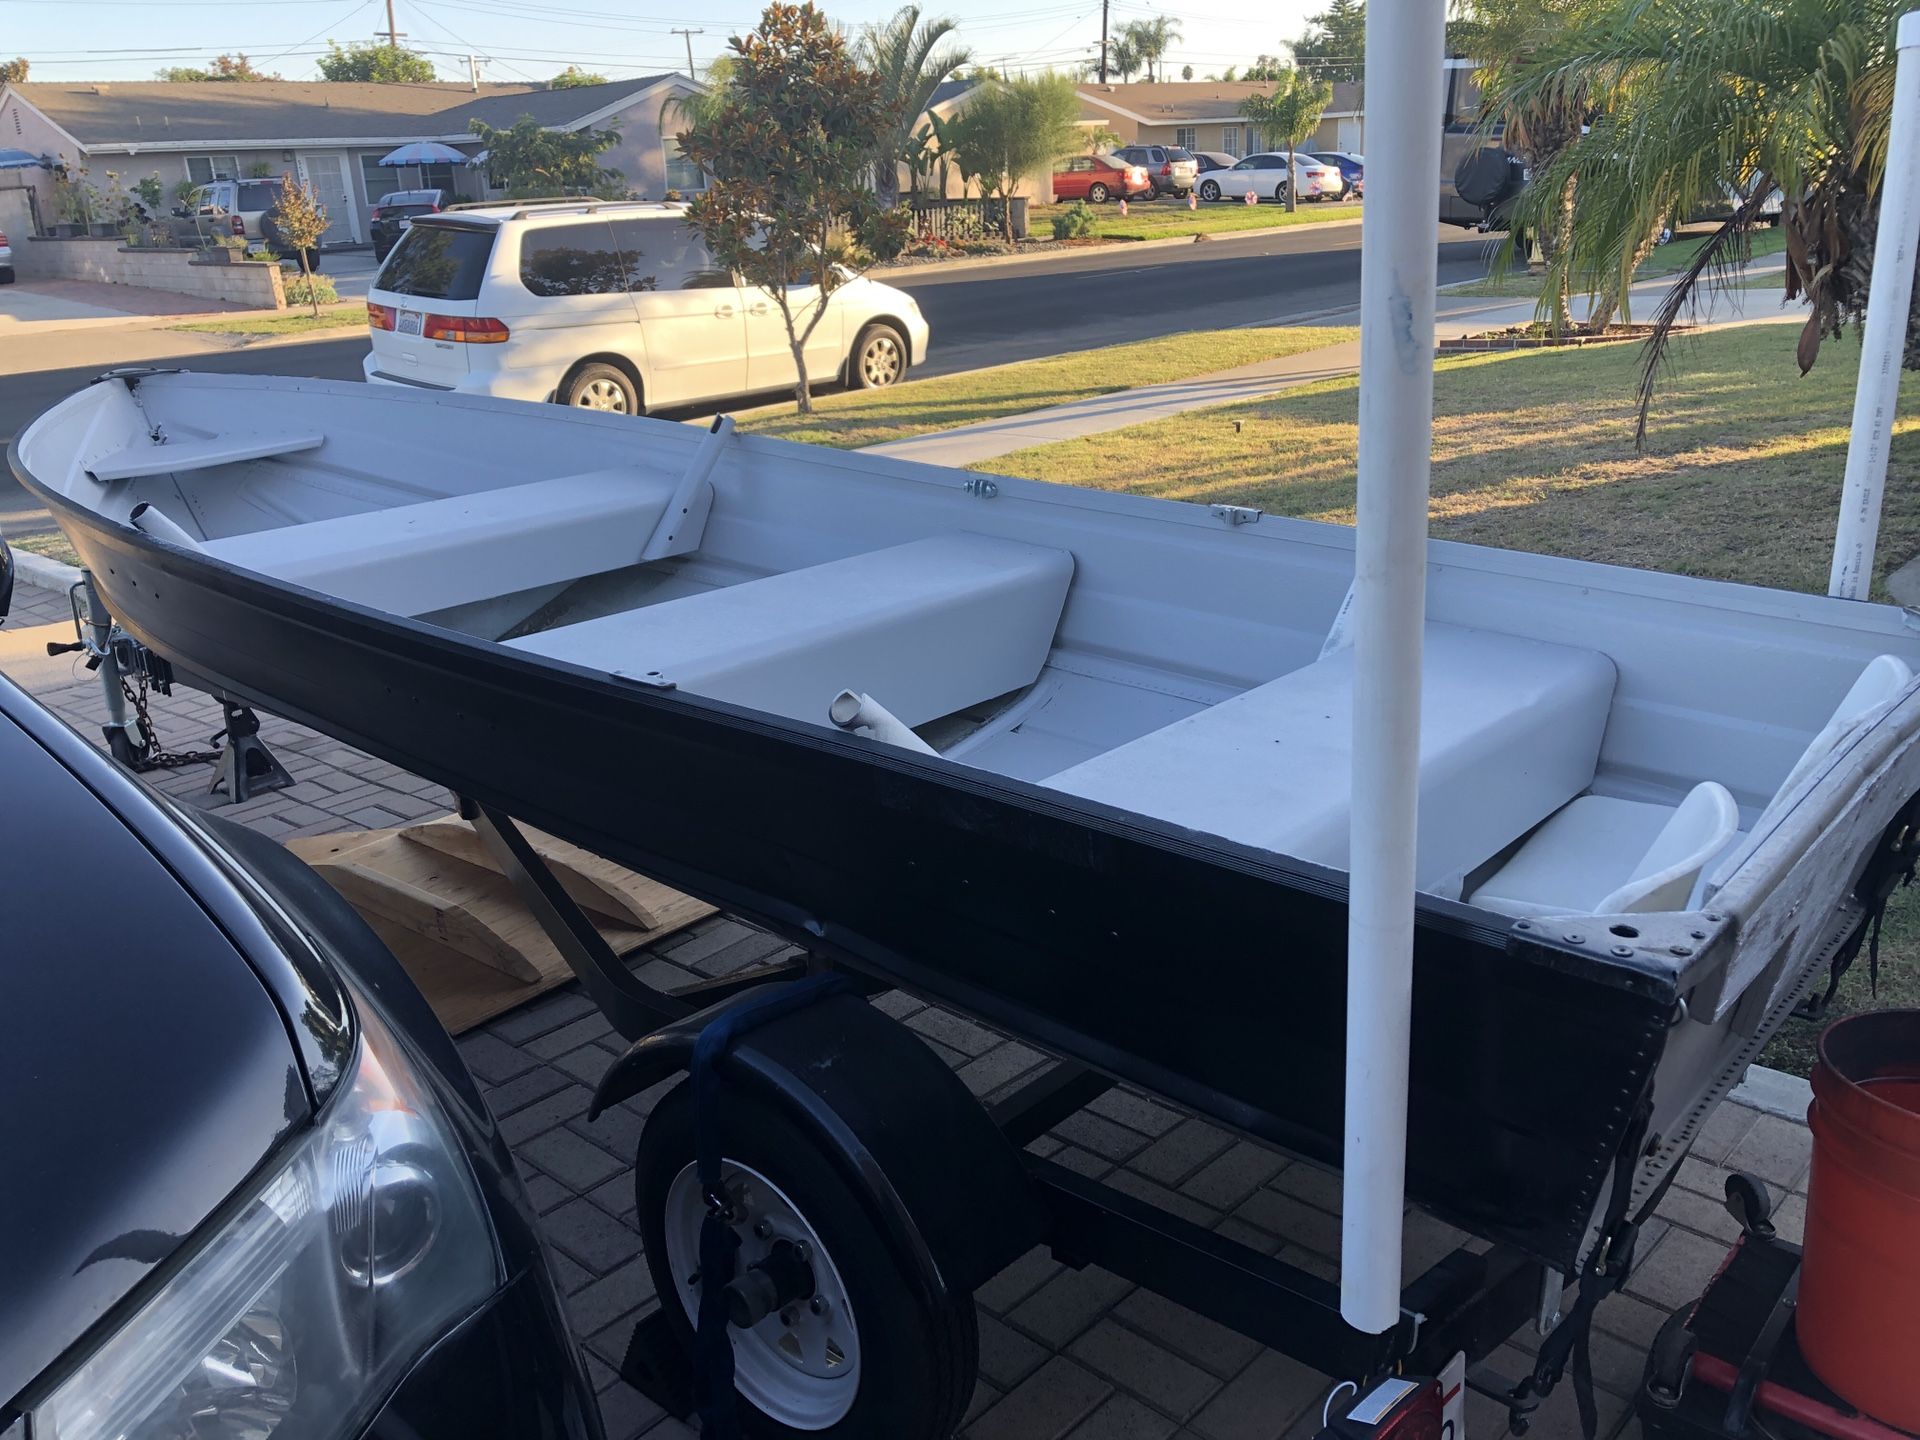 14’ Sea Nymph Aluminum fishing boat in great condition